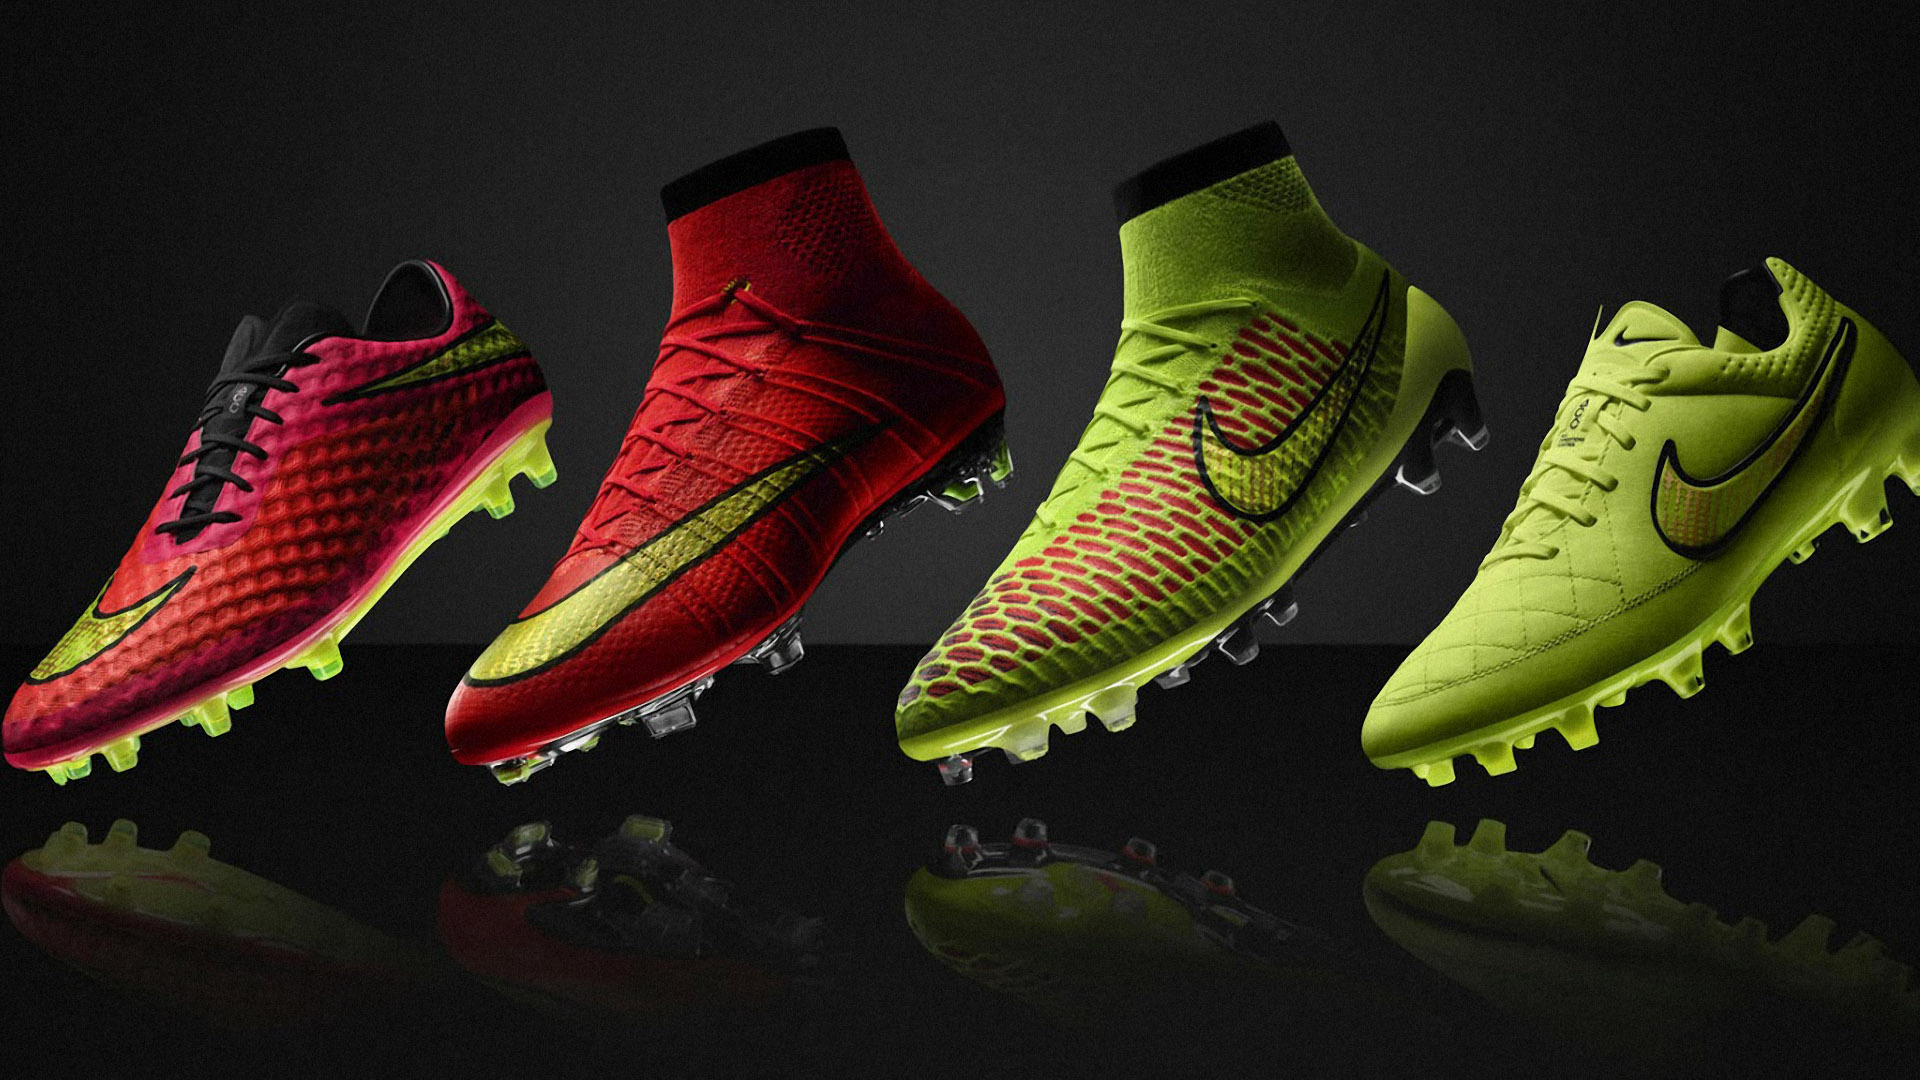 Nike Summer 2014 Football Boots Exclusive HD Wallpapers 7232